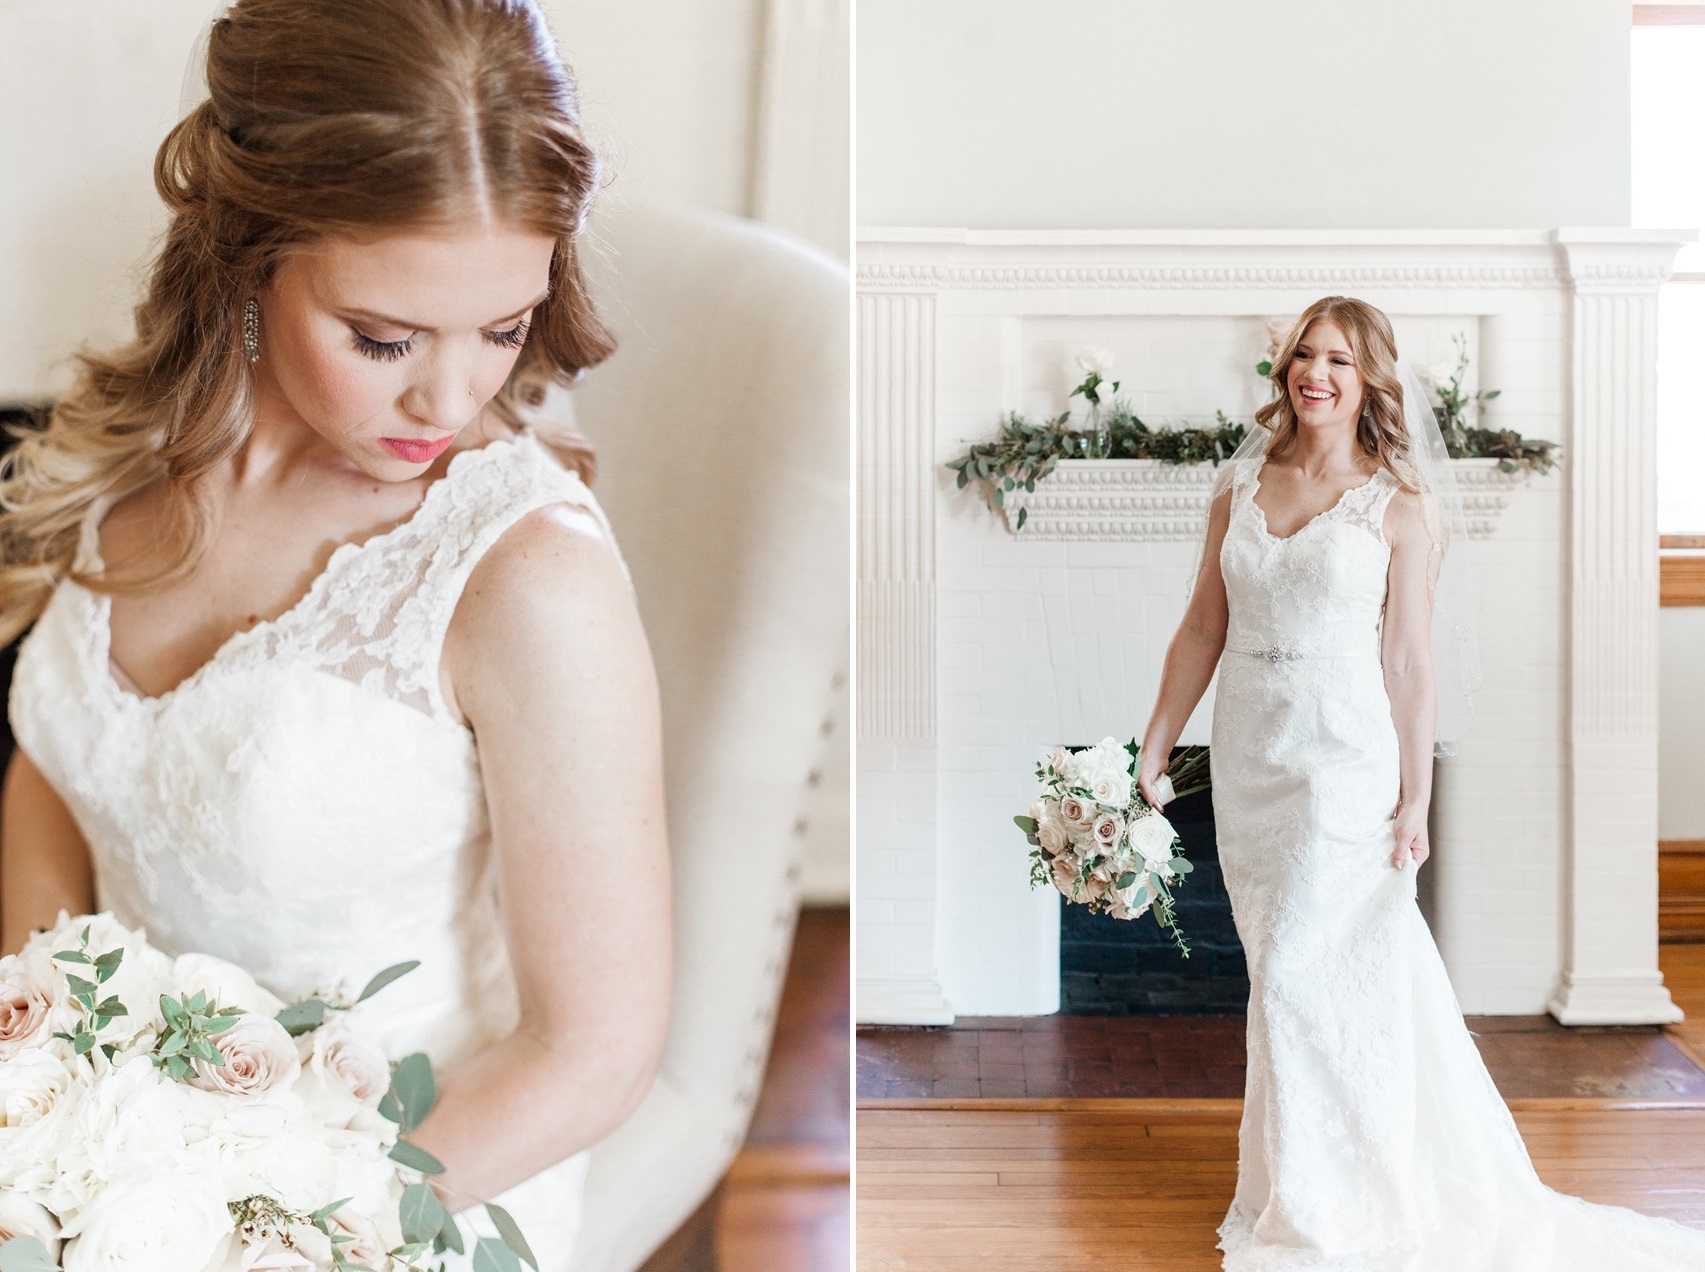 Vintage Inspired Bride in a Lace Wedding Dress